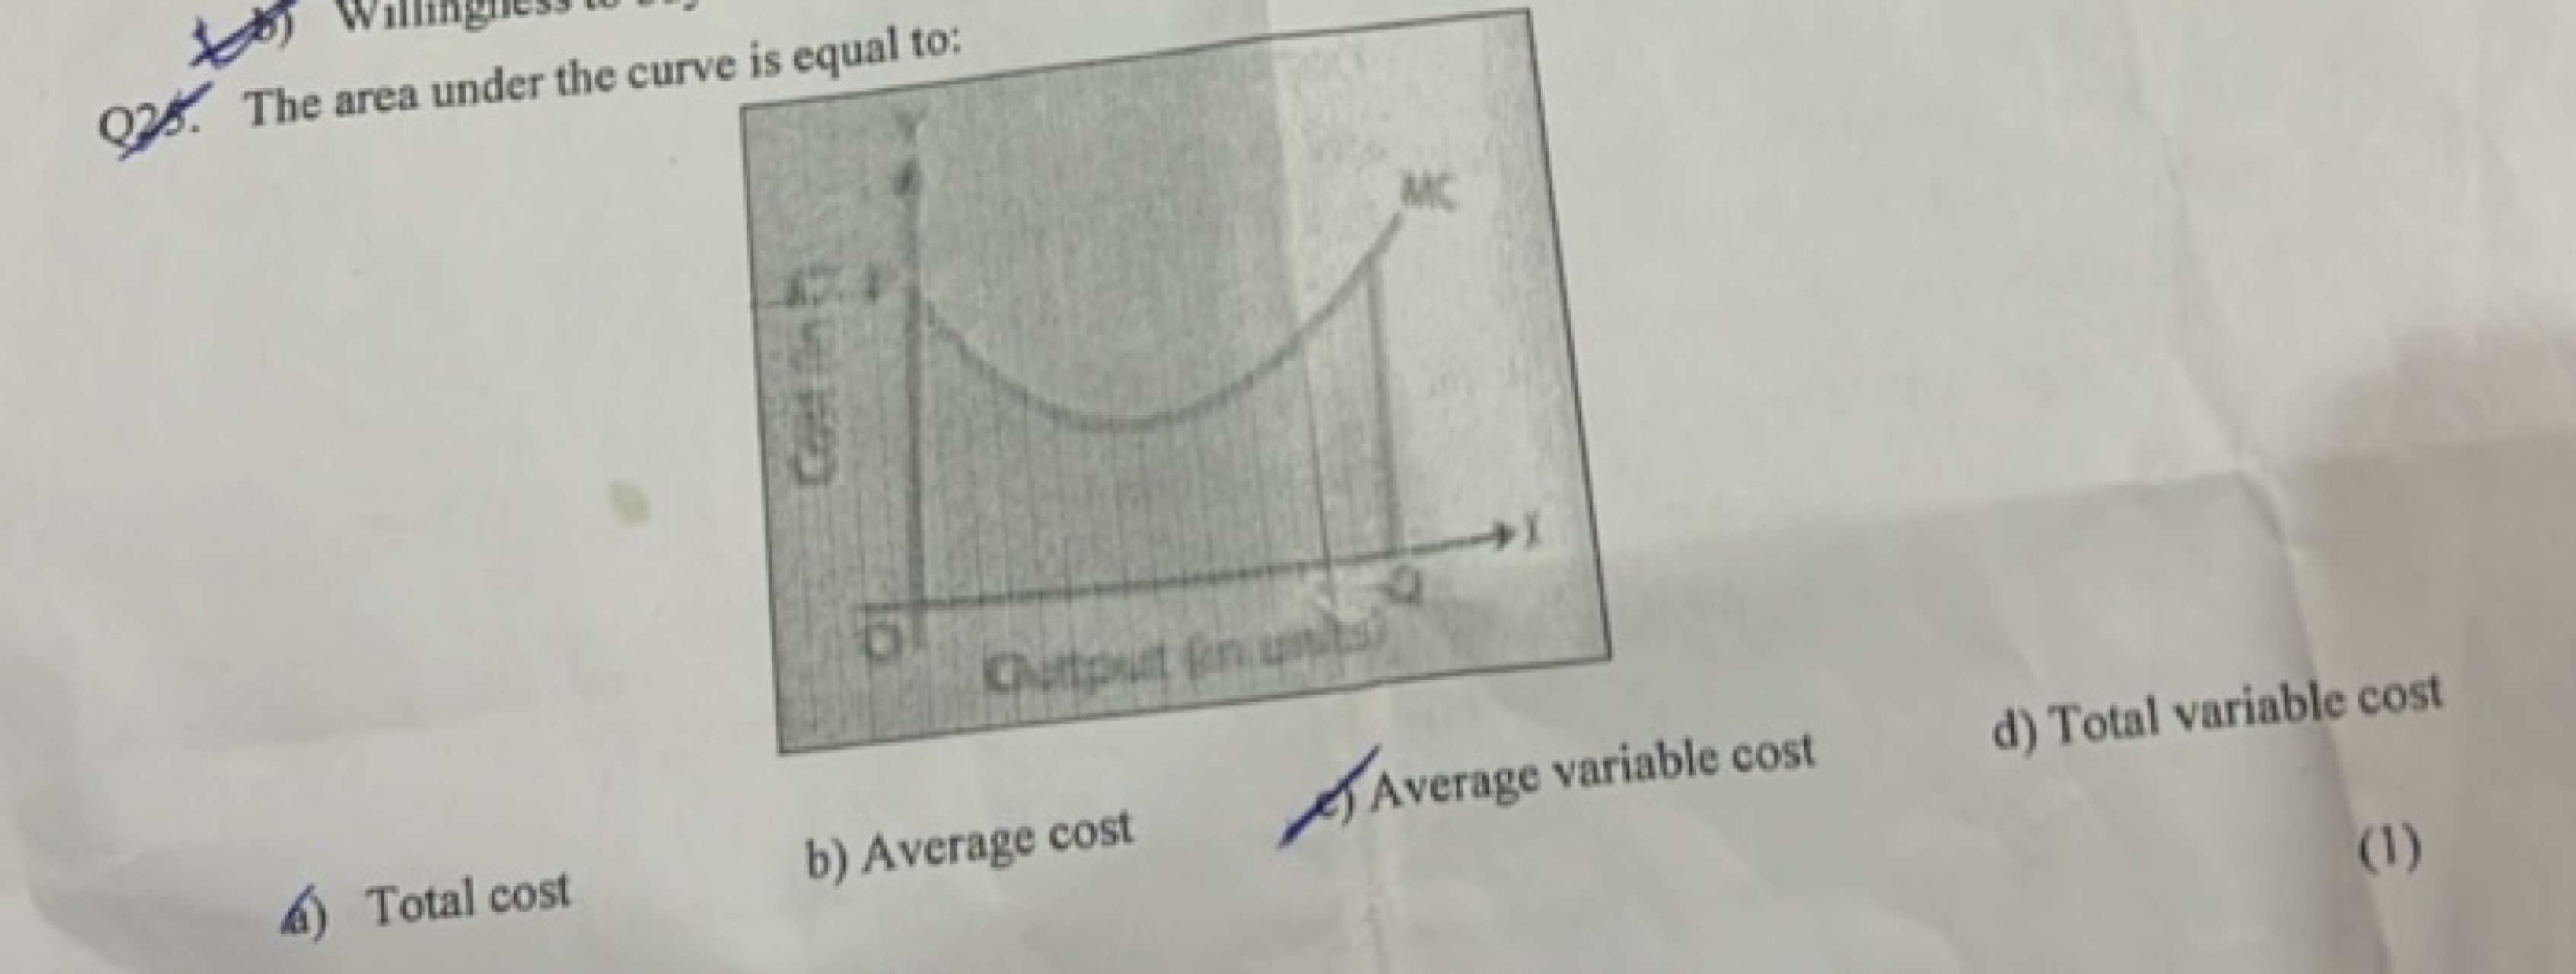 Q25. The area under the curve is equal to:
a) Total cost
b) Average co